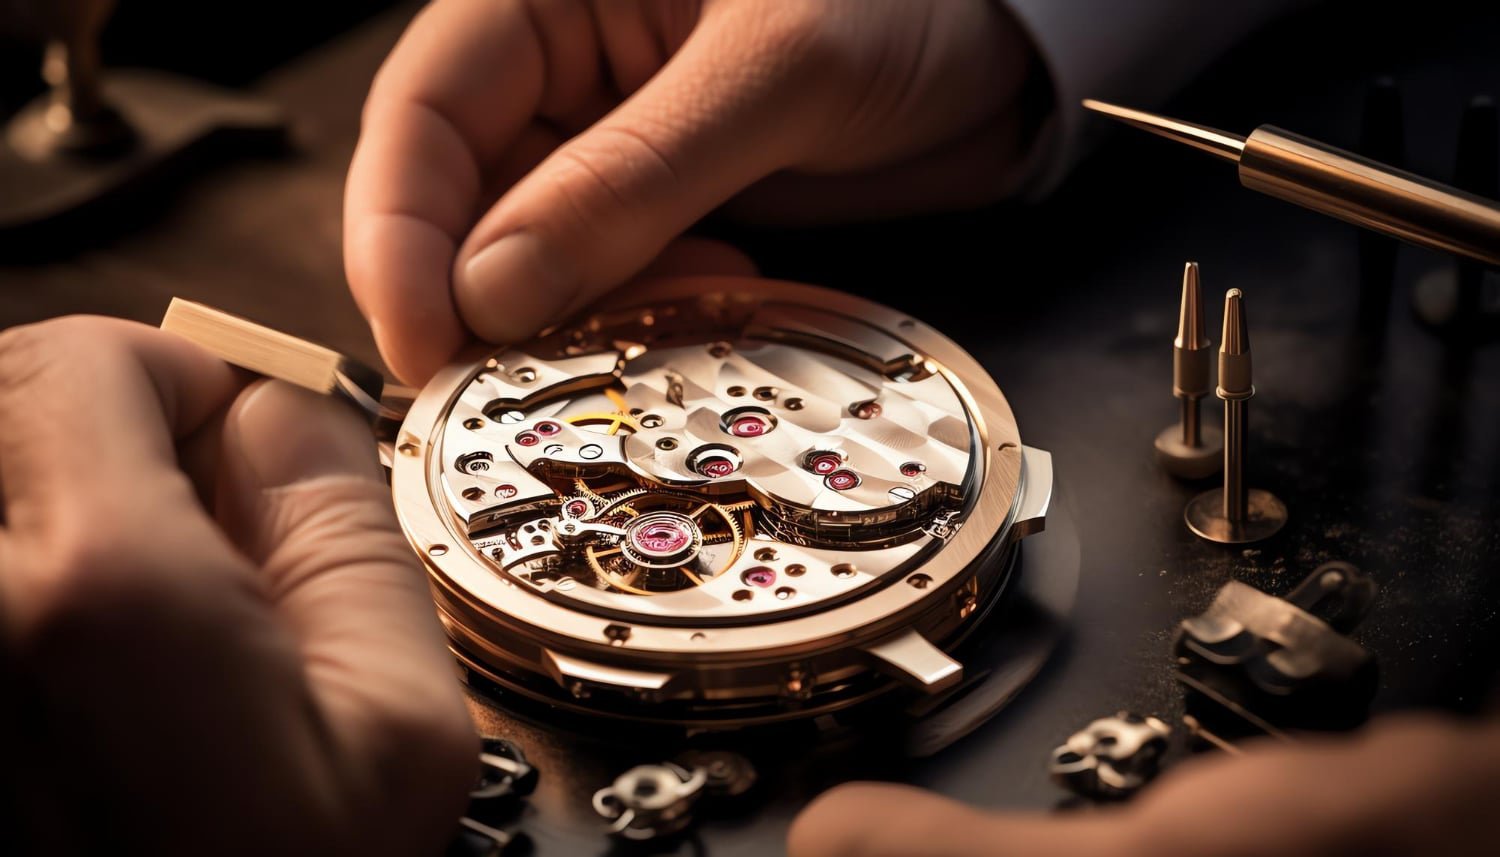 You are currently viewing Hamilton Timeless Watch Craftsmanship